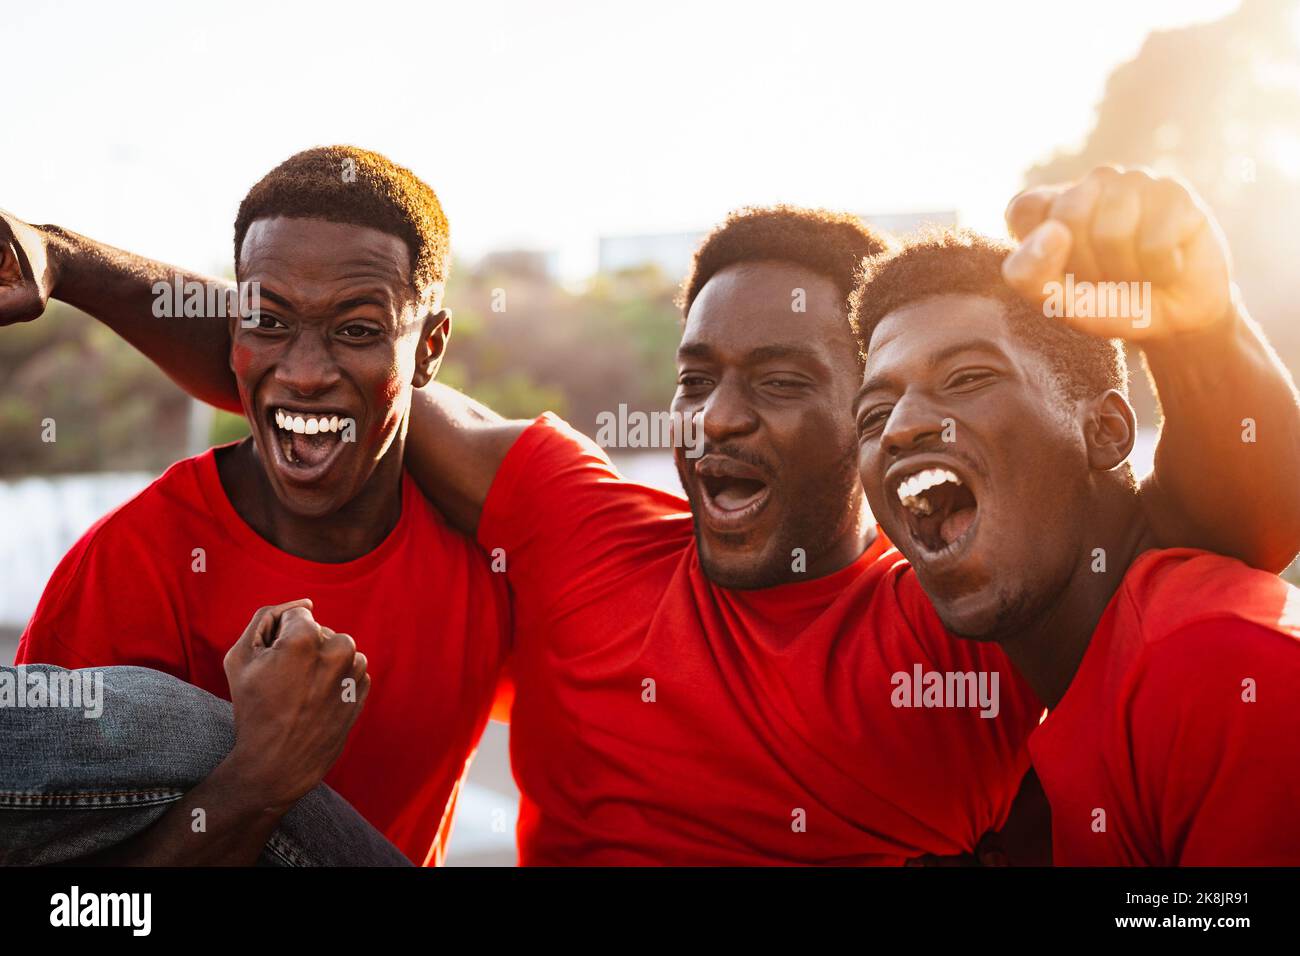 African football fans having fun supporting their favorite team - Sport entertainment concept Stock Photo